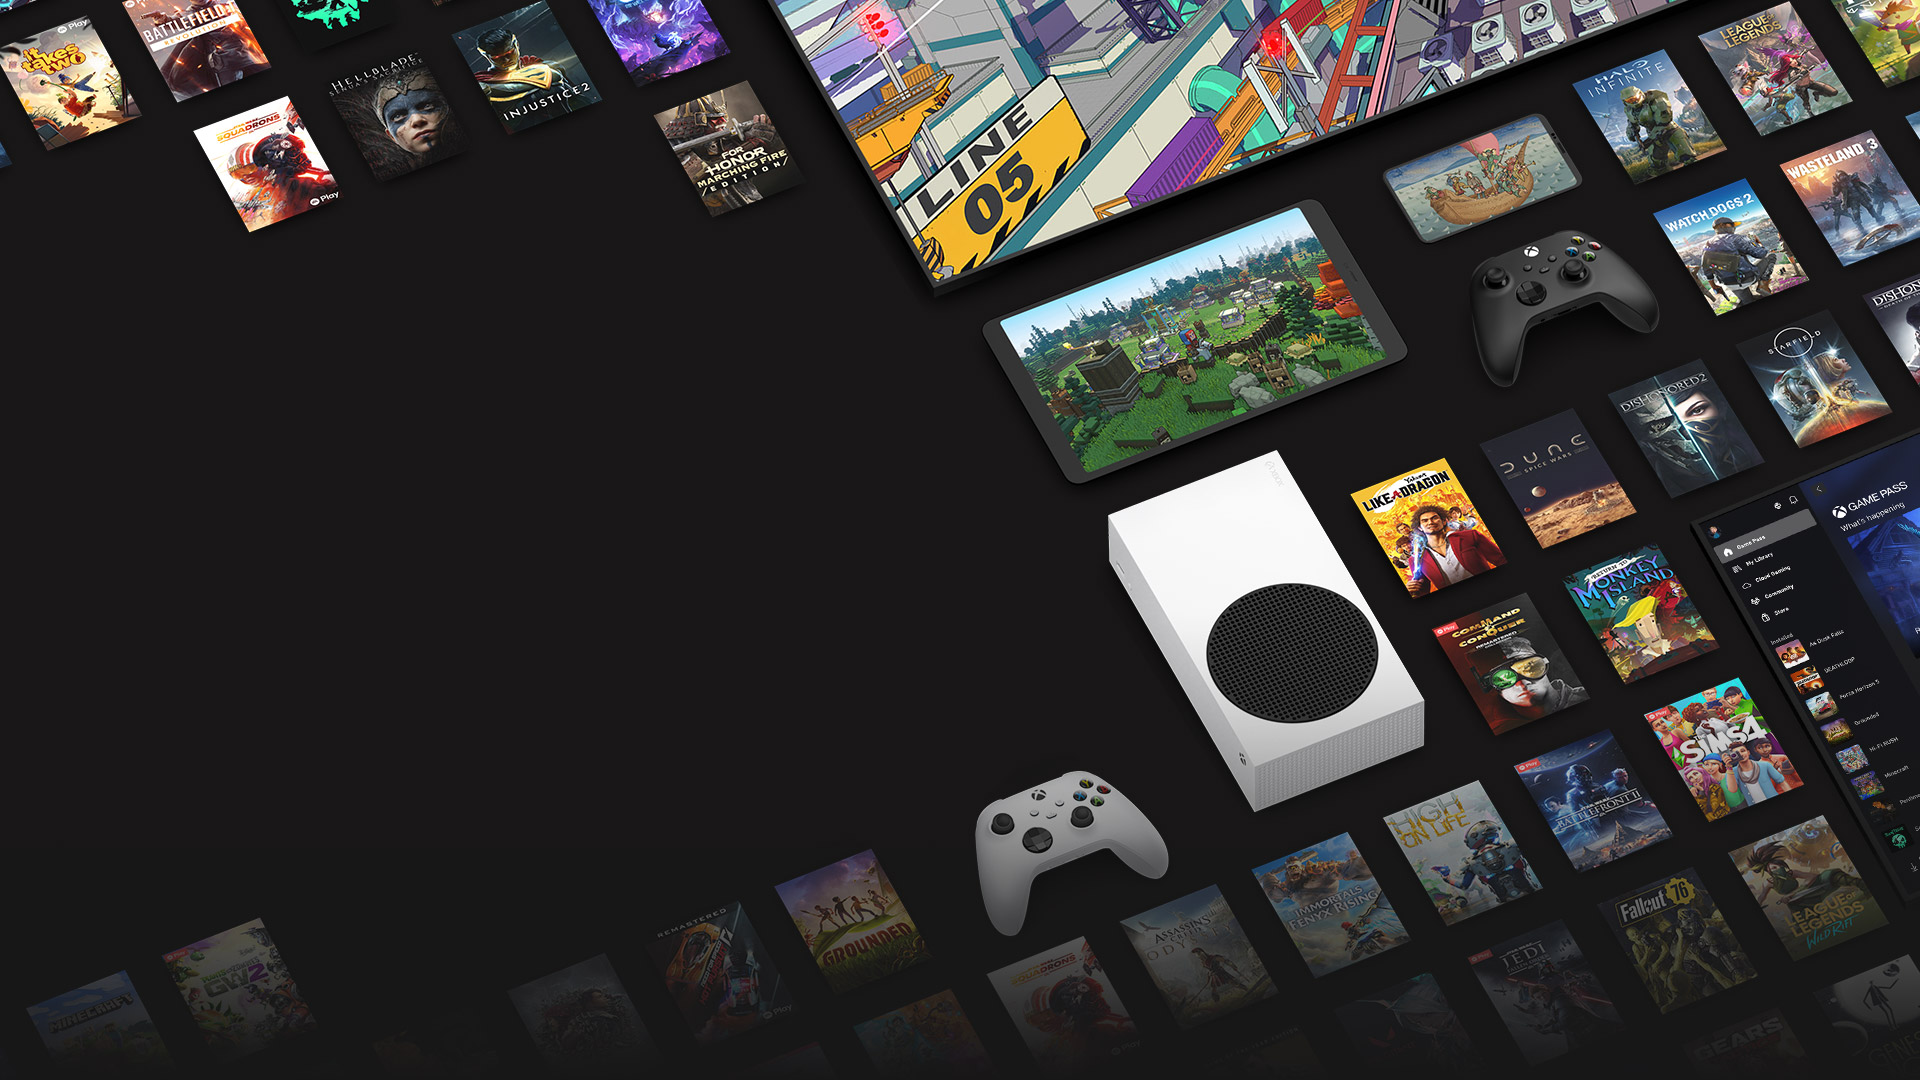 Game art from multiple games available now with Xbox Game Pass Ultimate surround multiple devices, including a console, PC, tablet and smart TV.